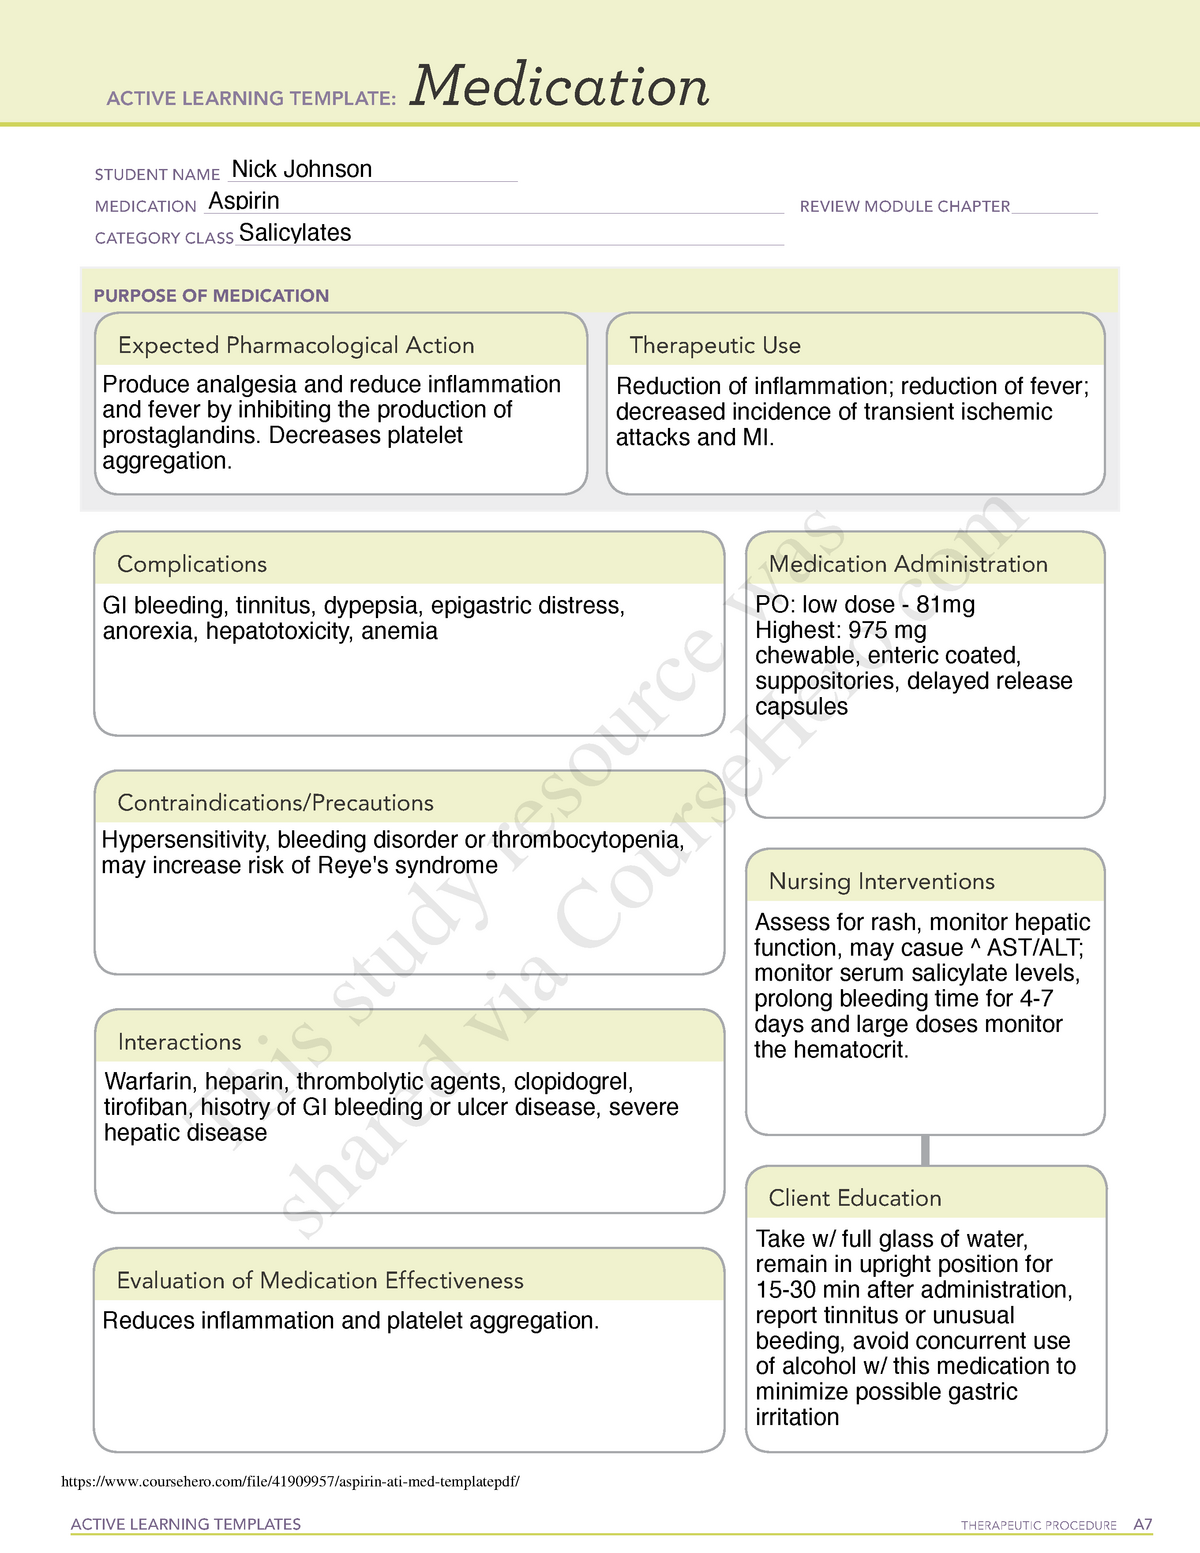 Aspirin ati med template ACTIVE LEARNING TEMPLATES THERAPEUTIC